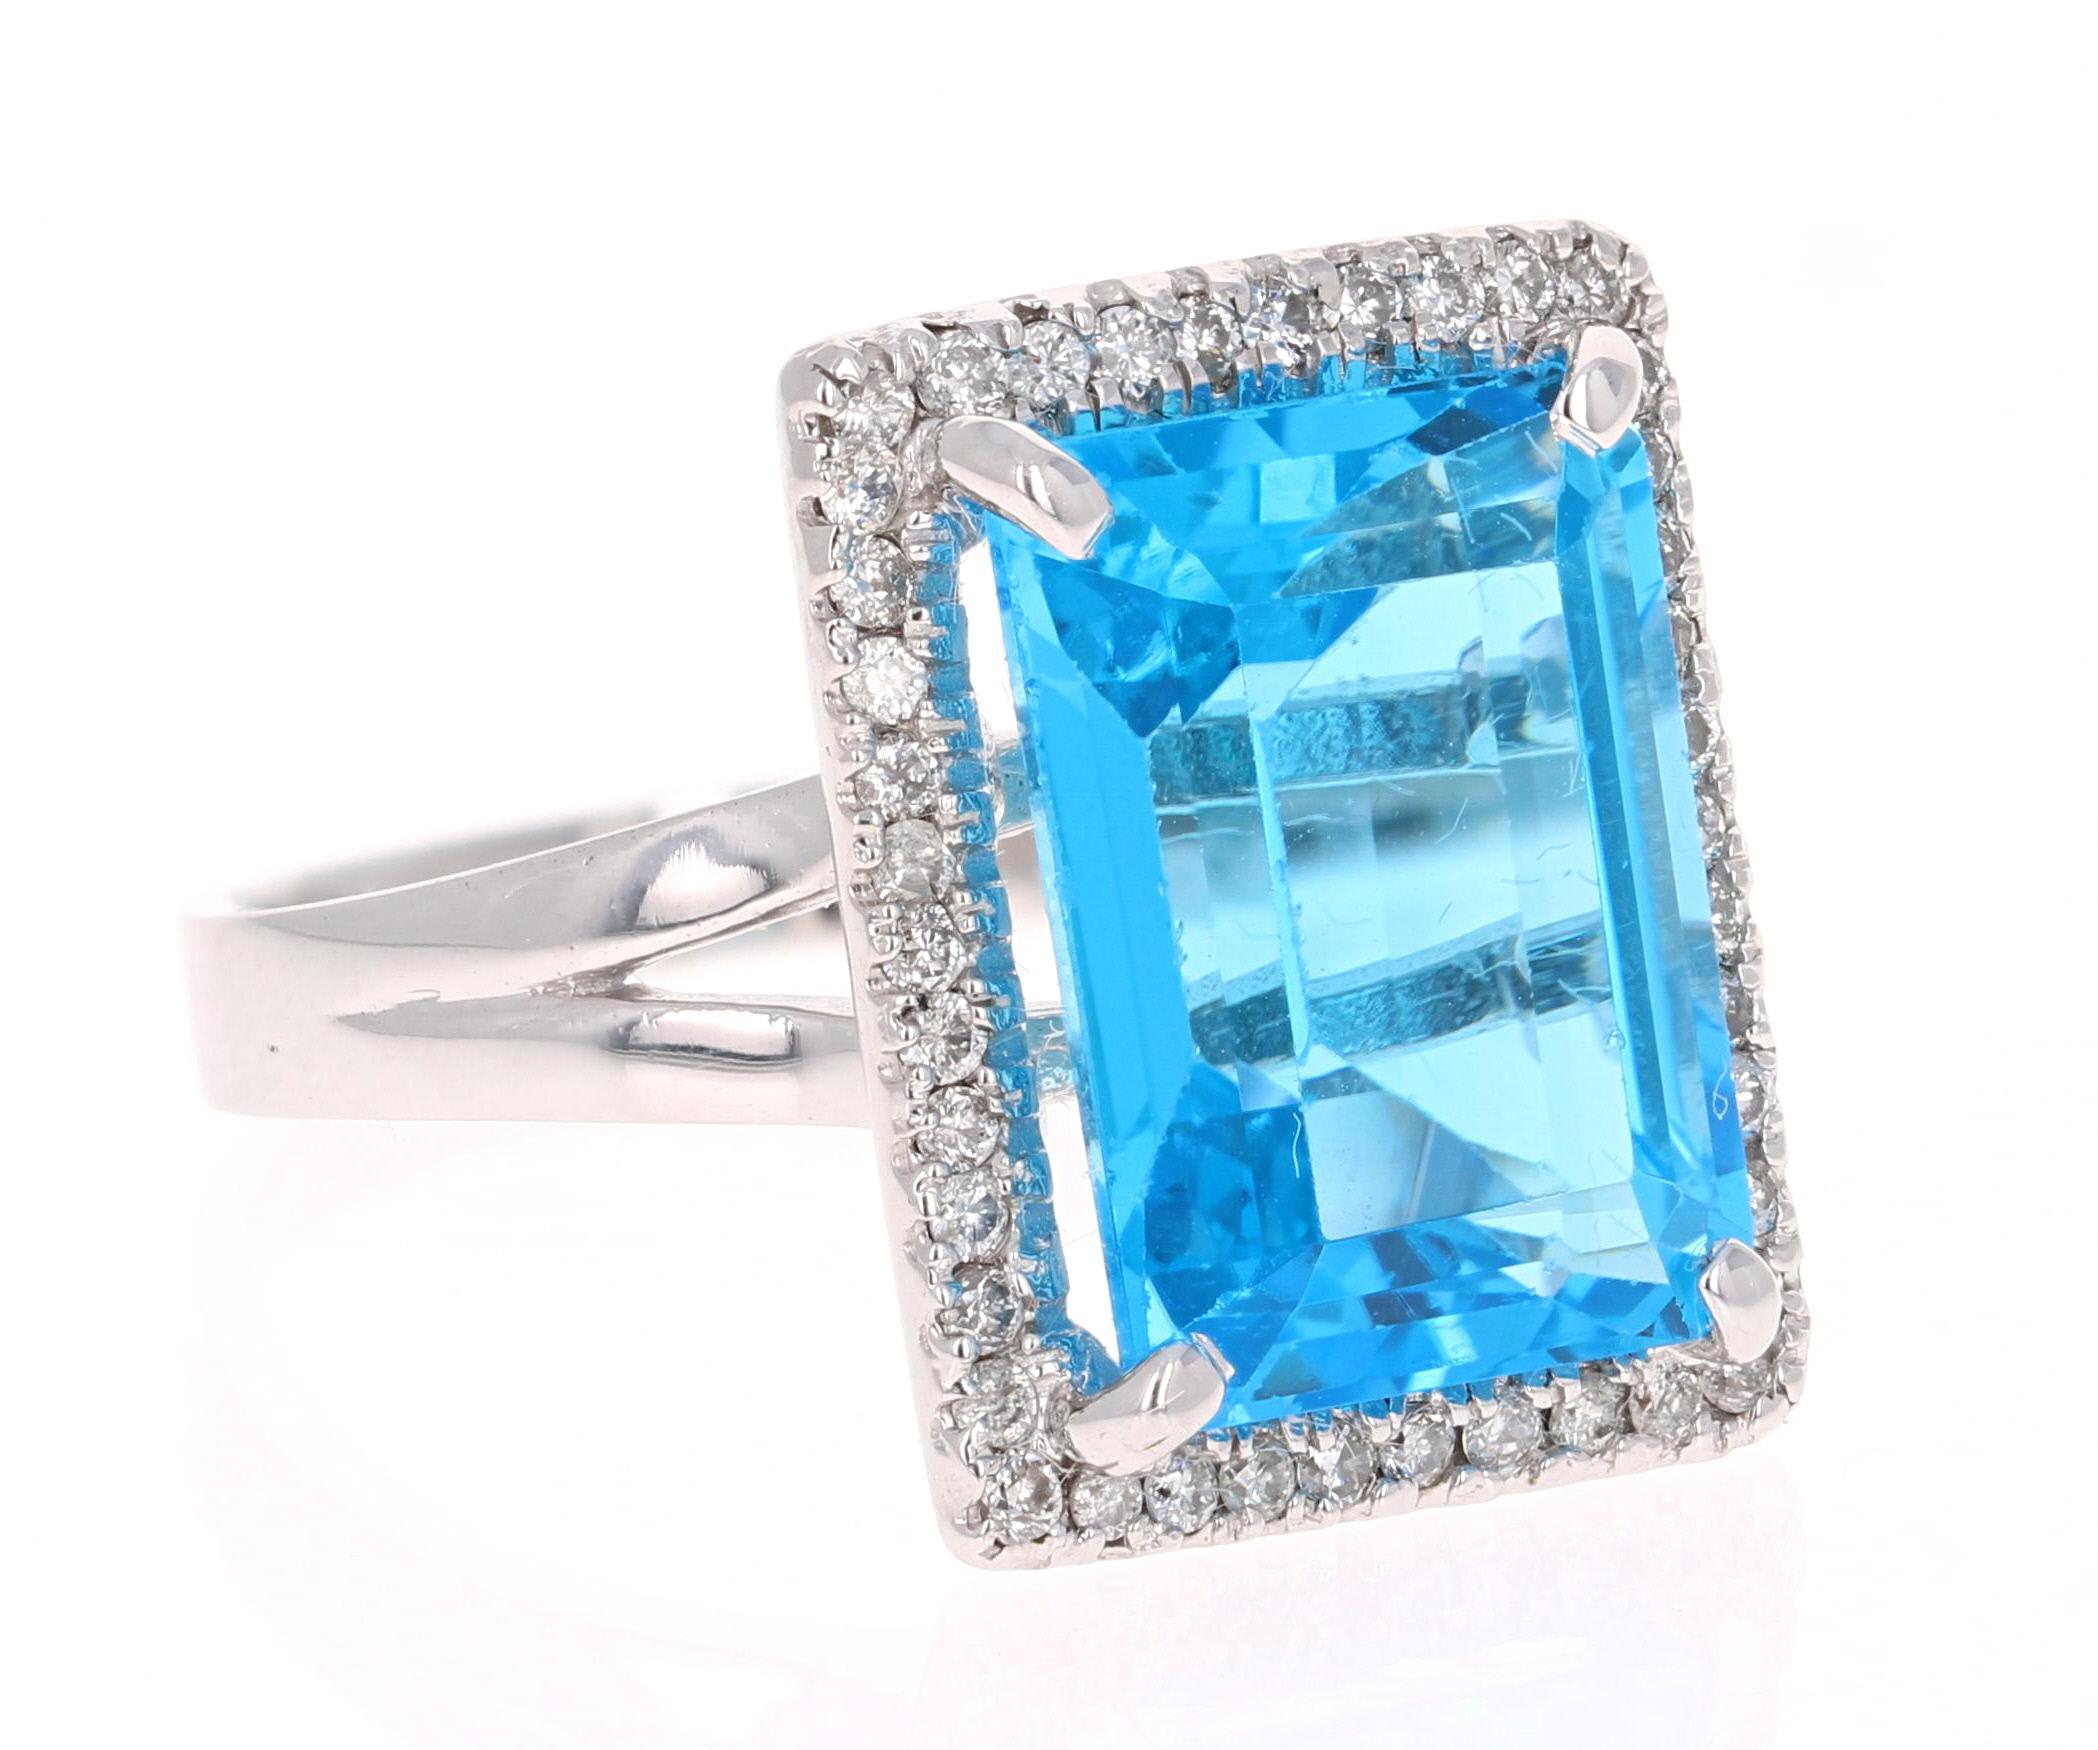 This stunning statement ring has a large Emerald Cut Blue Topaz that weighs 10.21 Carats. 
It is surrounded by a simple halo of 43 Round Cut Diamonds that weigh 0.38 Carats. 

It is crafted in 14 Karat White Gold and weighs approximately 5.5 grams.